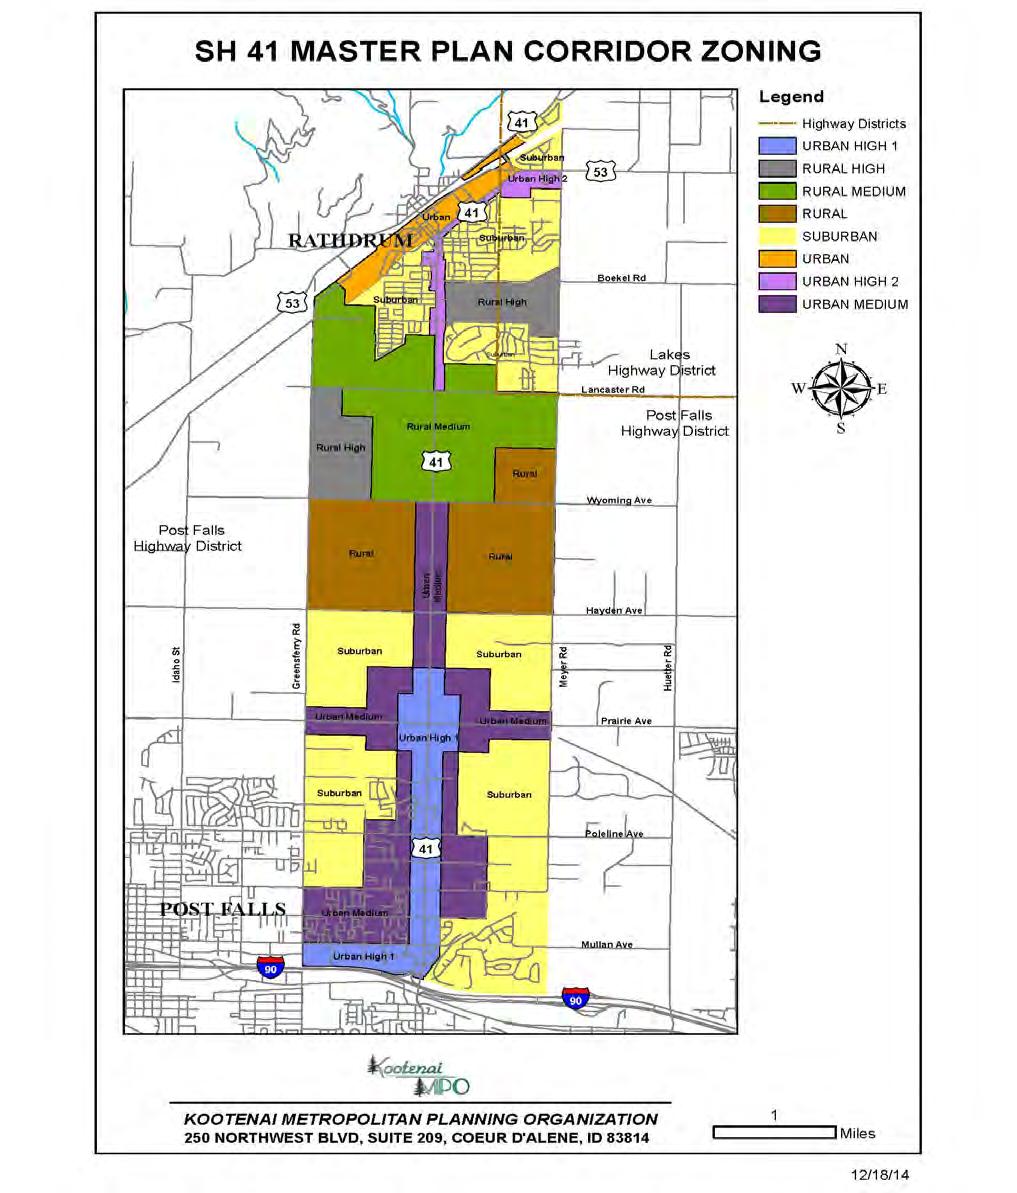 Figure 17 - Combined SH 41 Corridor Mixed Land Use Map 2014 updated collaborative zoning efforts between: